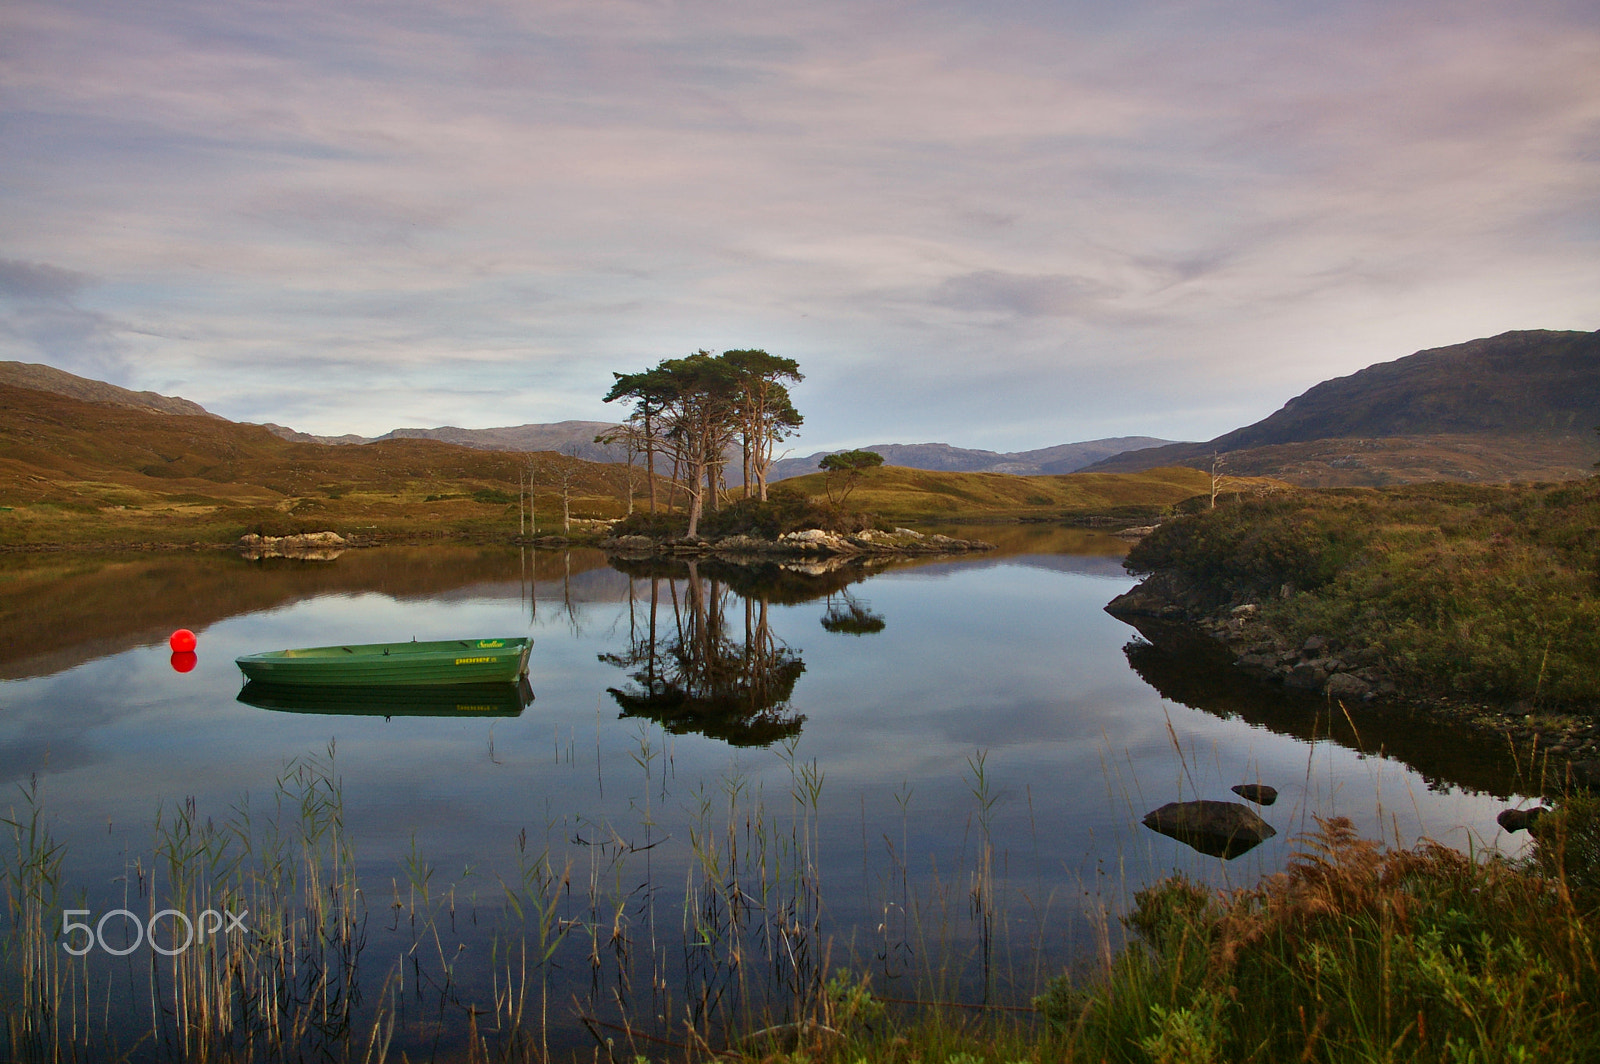 Pentax K100D + Pentax smc DA 18-55mm F3.5-5.6 AL sample photo. Loch assynt at sunset with boat, trees, mountains, reflections in the water photography